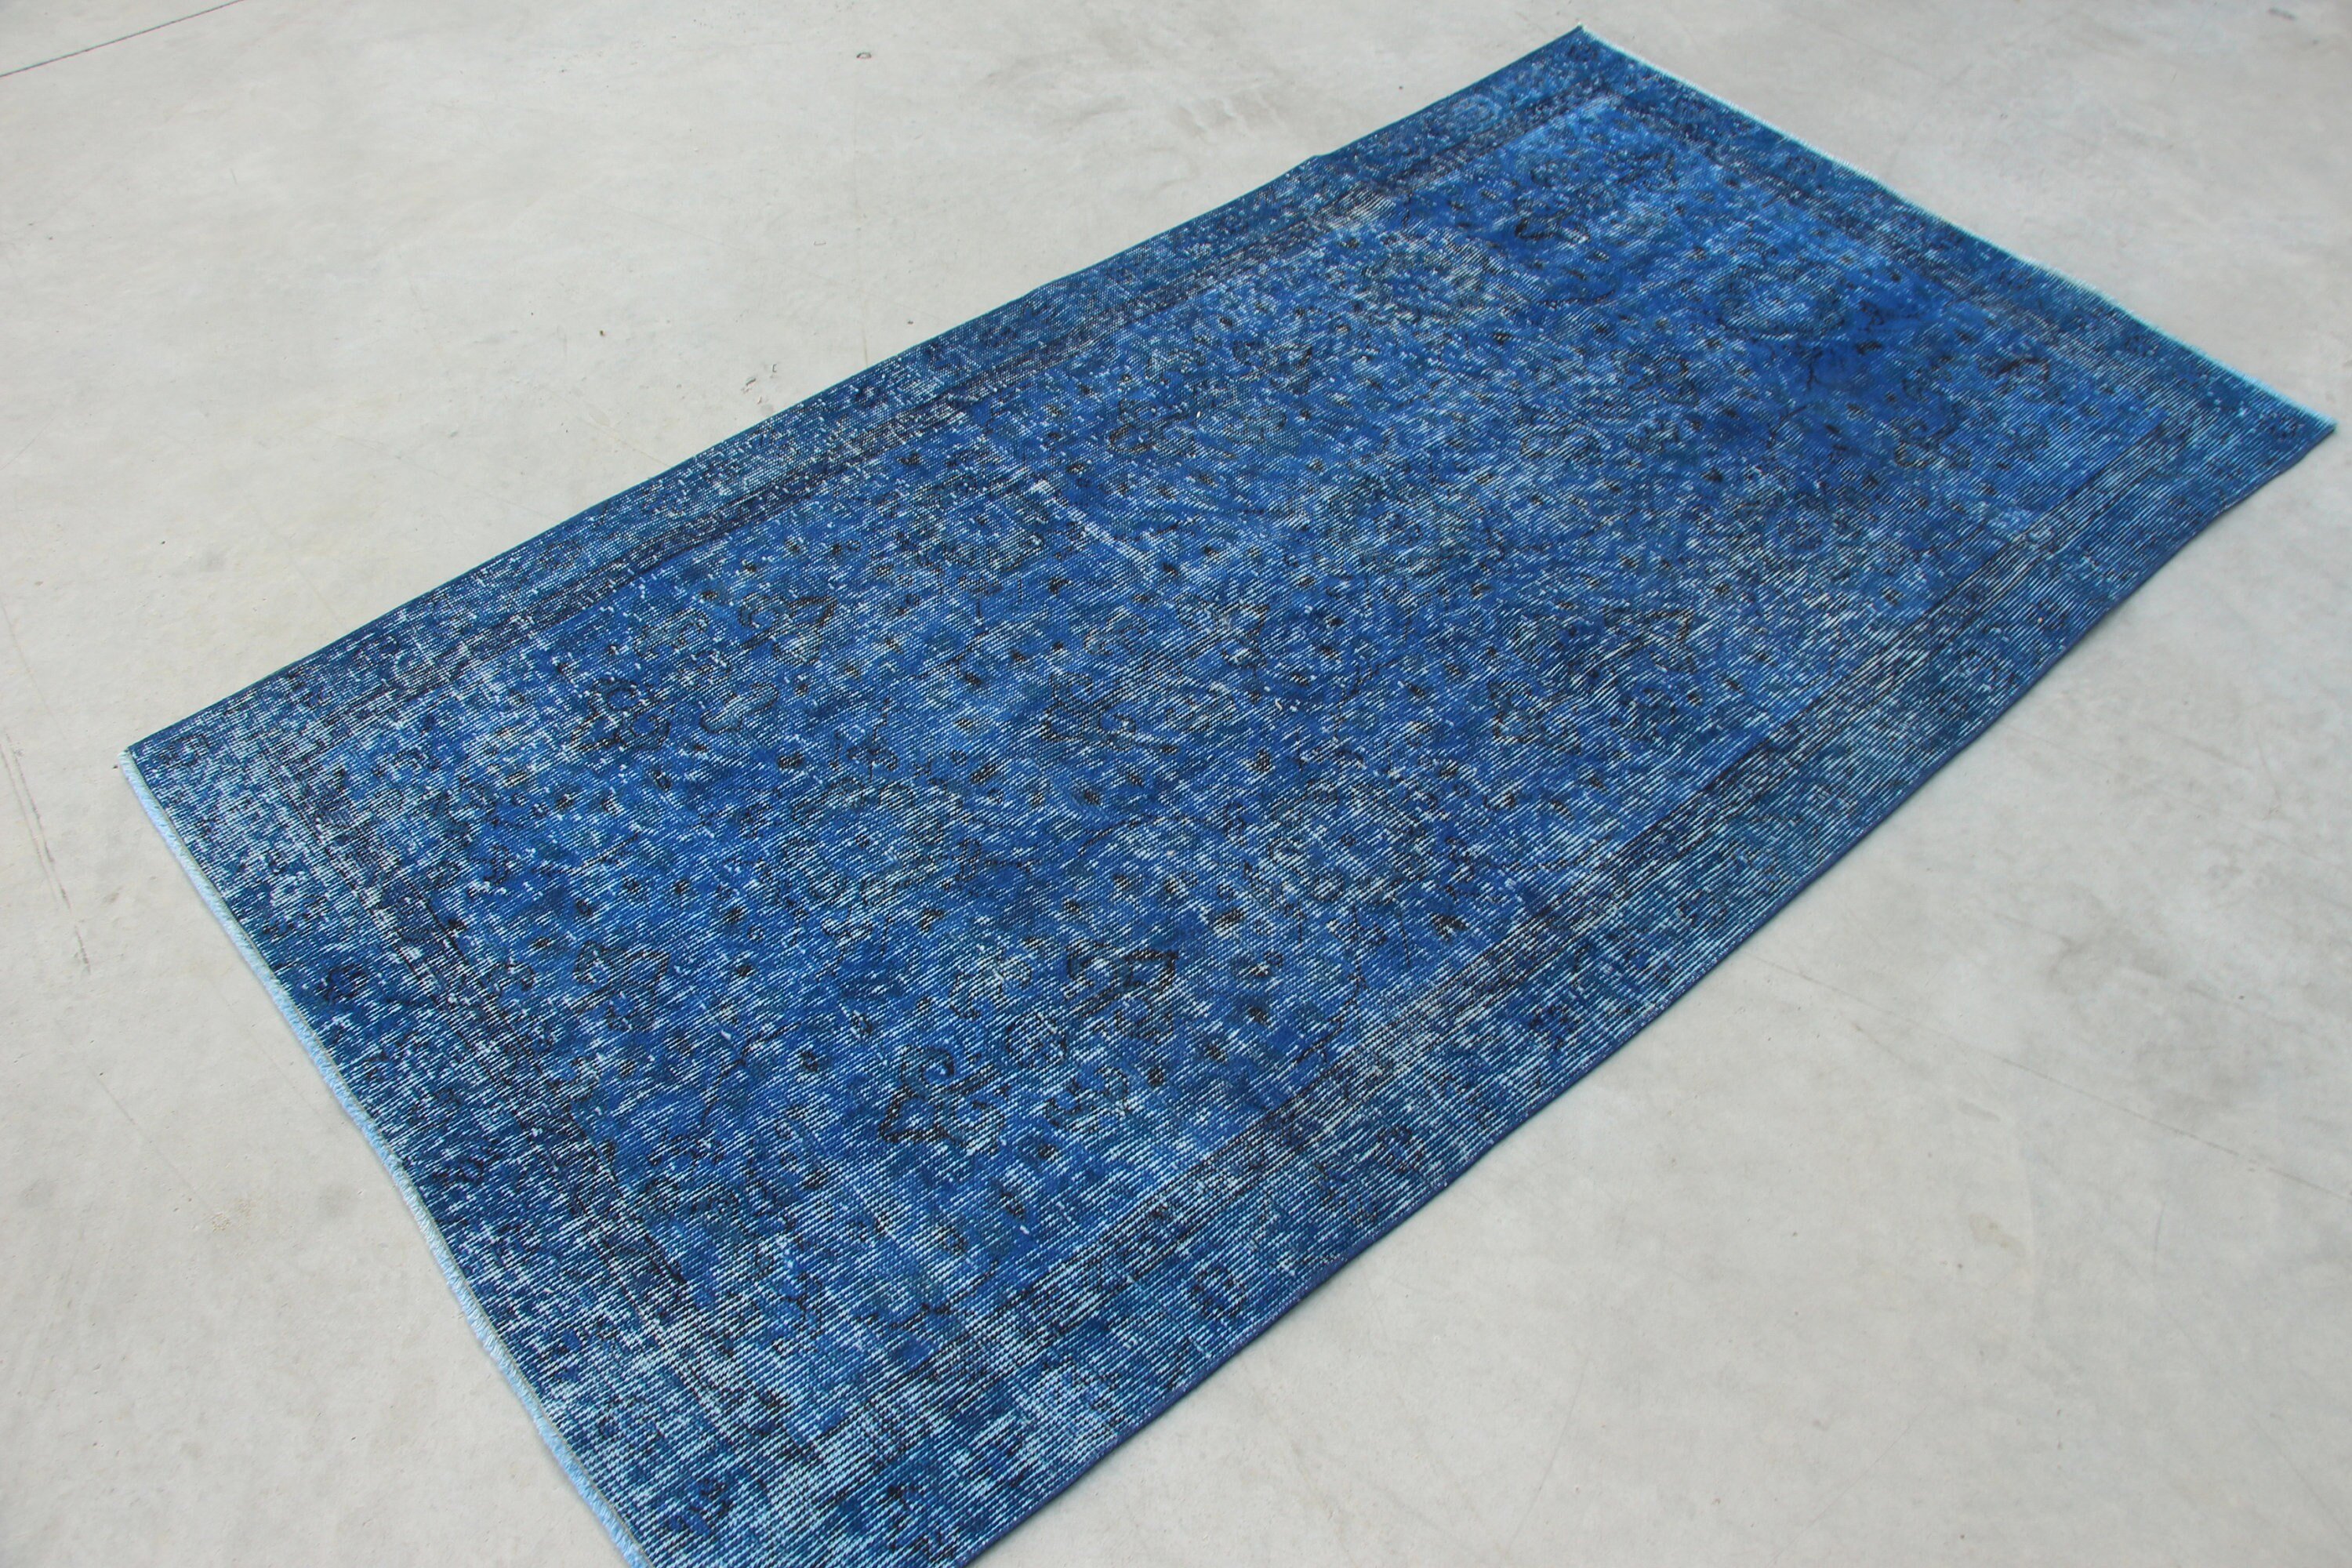 Turkish Rug, Rugs for Kitchen, Blue Moroccan Rug, Kitchen Rug, Antique Rugs, 3.6x6.6 ft Accent Rugs, Cool Rug, Nursery Rugs, Vintage Rug